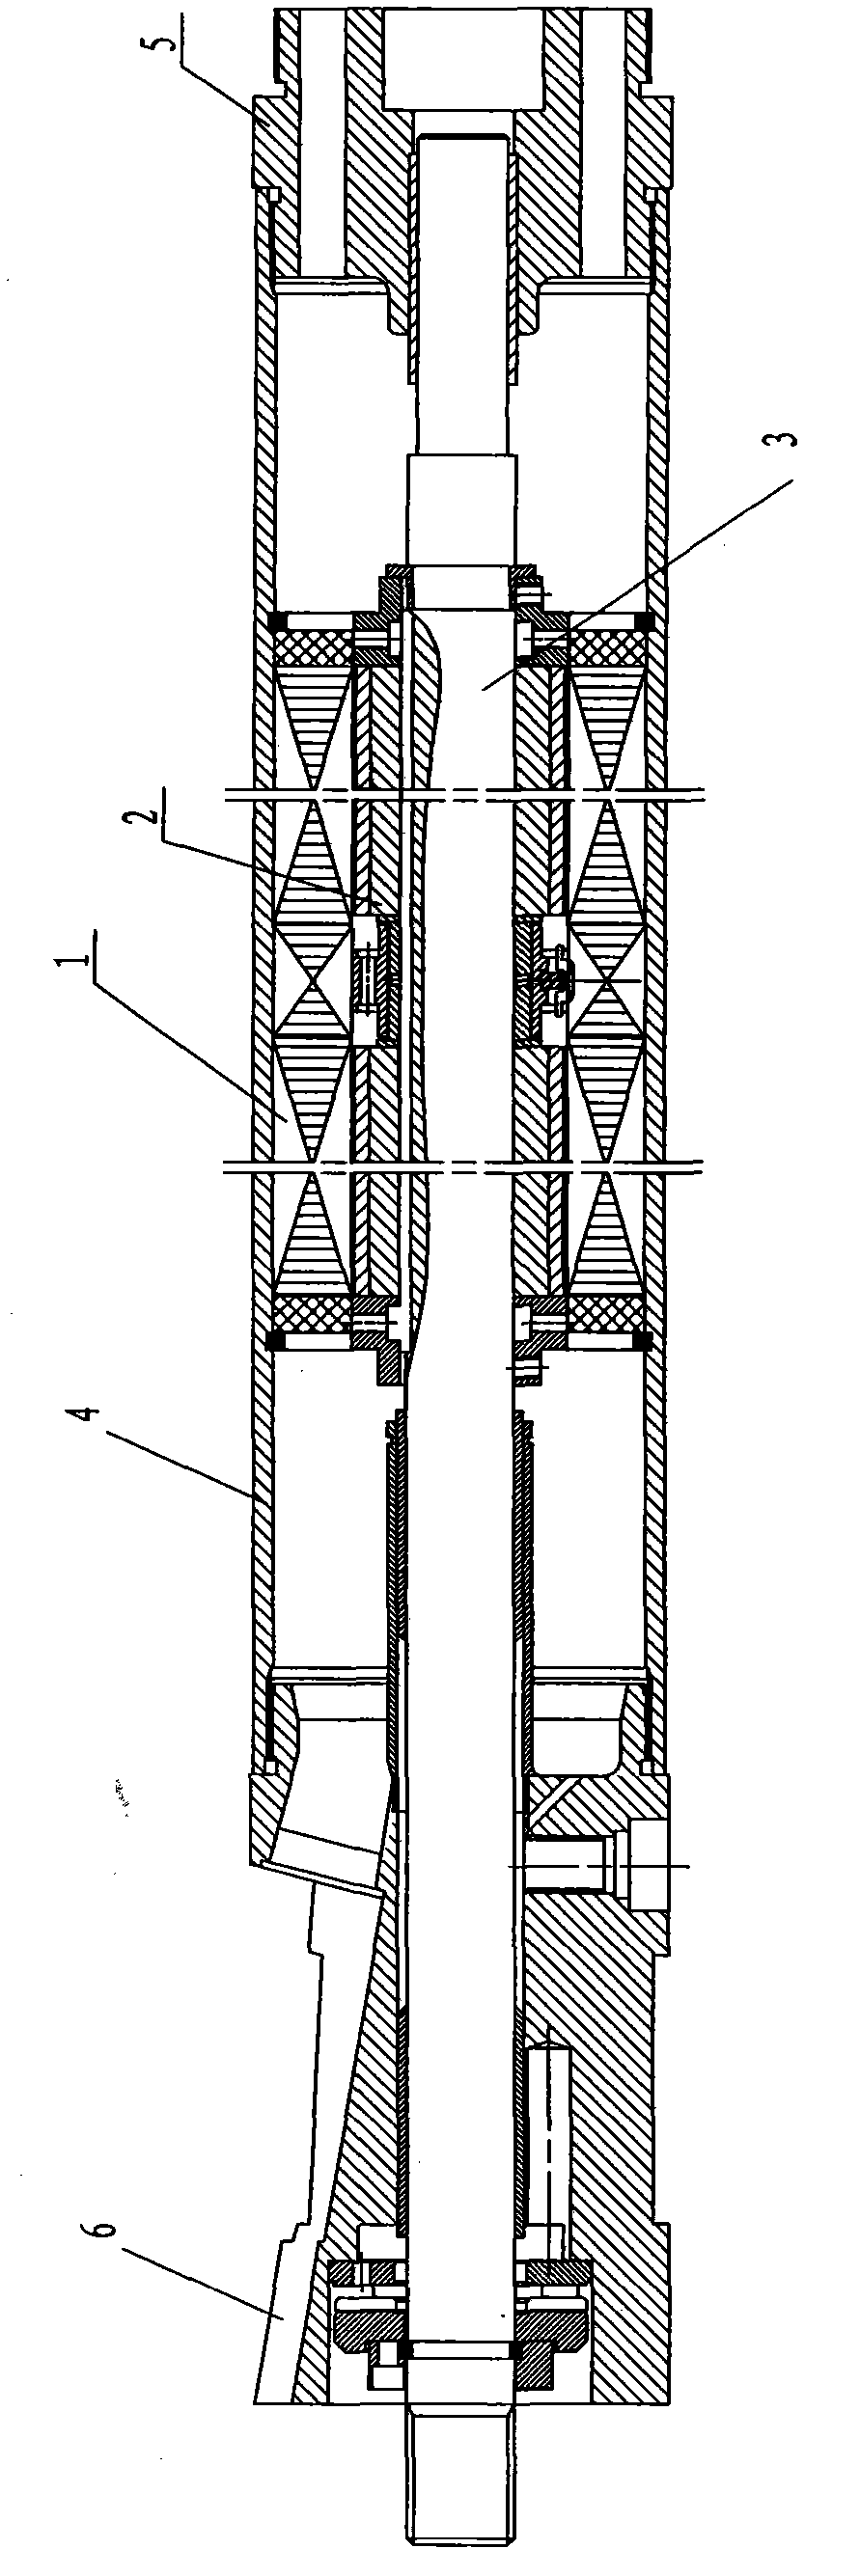 Switched reluctance motor of directly-driven submersible screw pump